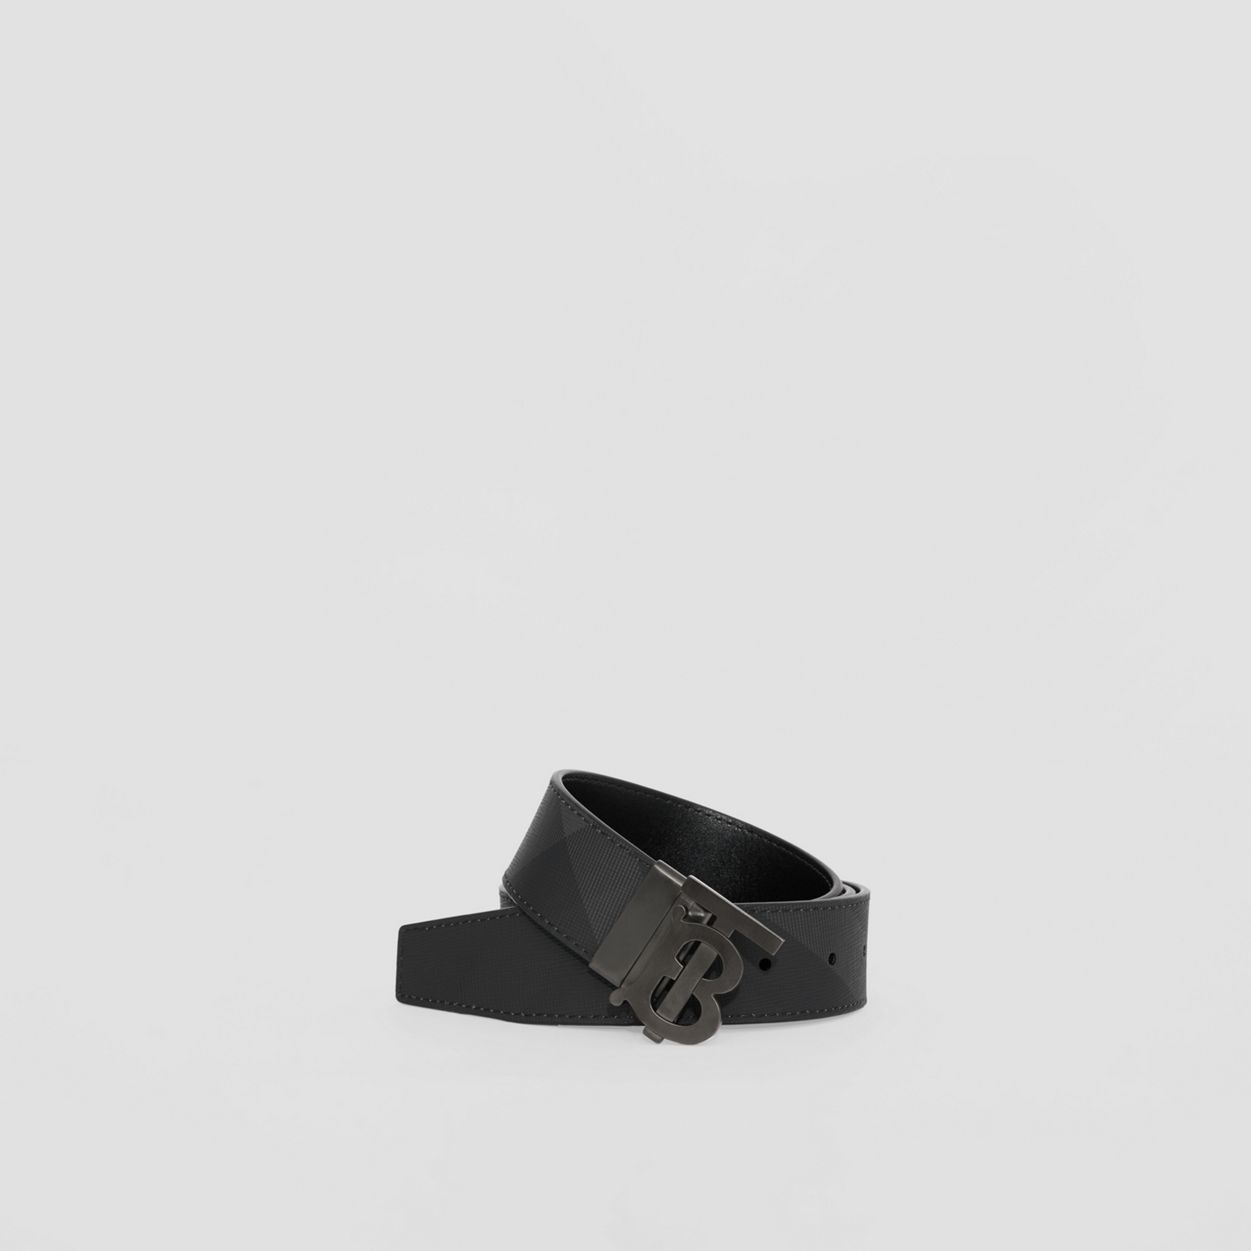 Burberry Reversible Charcoal Check and Leather Belt , Size: 95